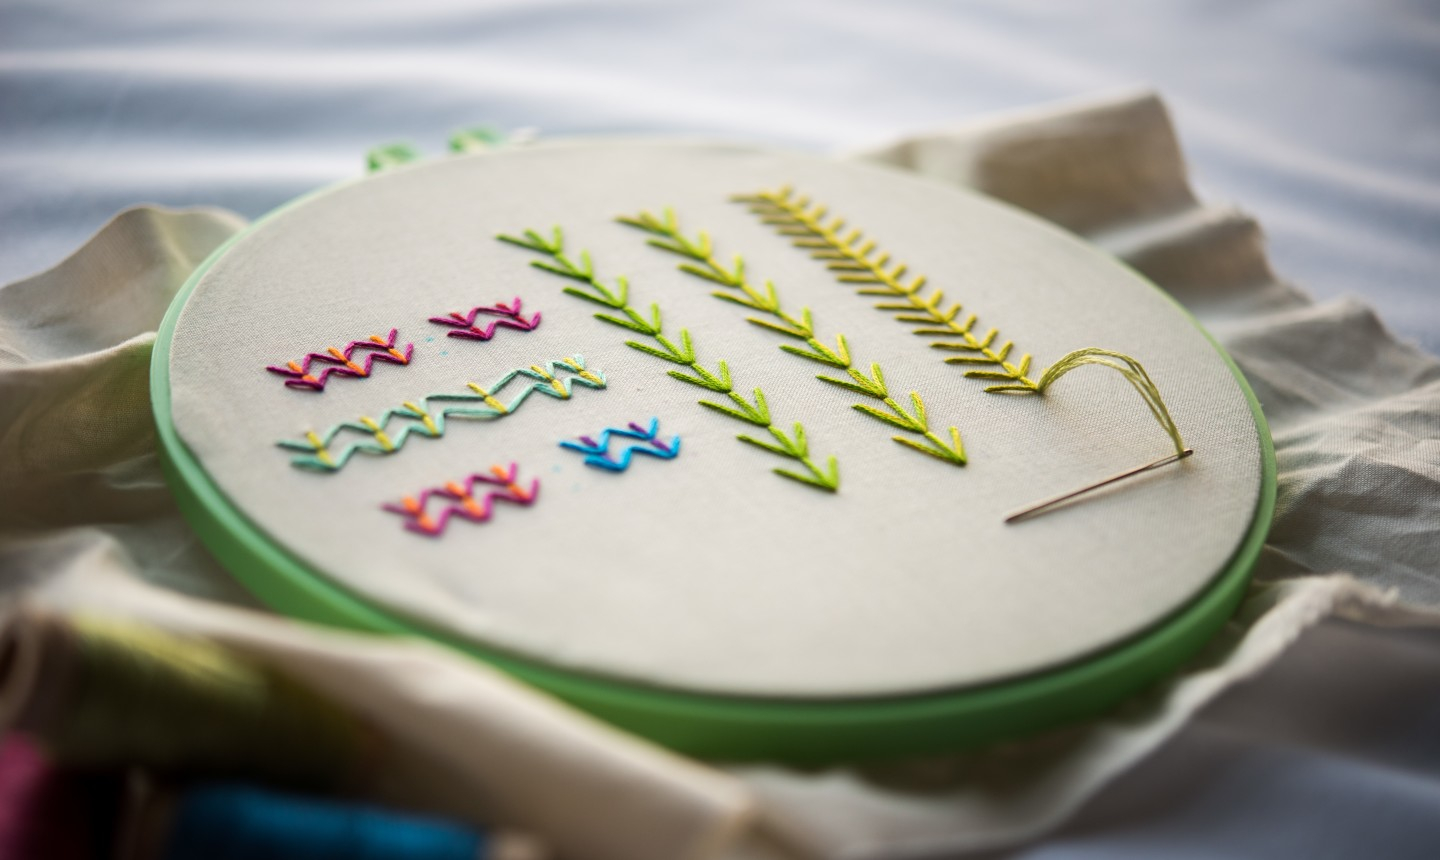 Make Your Own Embroidery Pattern The Top 10 Hand Embroidery Stitches Every Beginner Should Learn